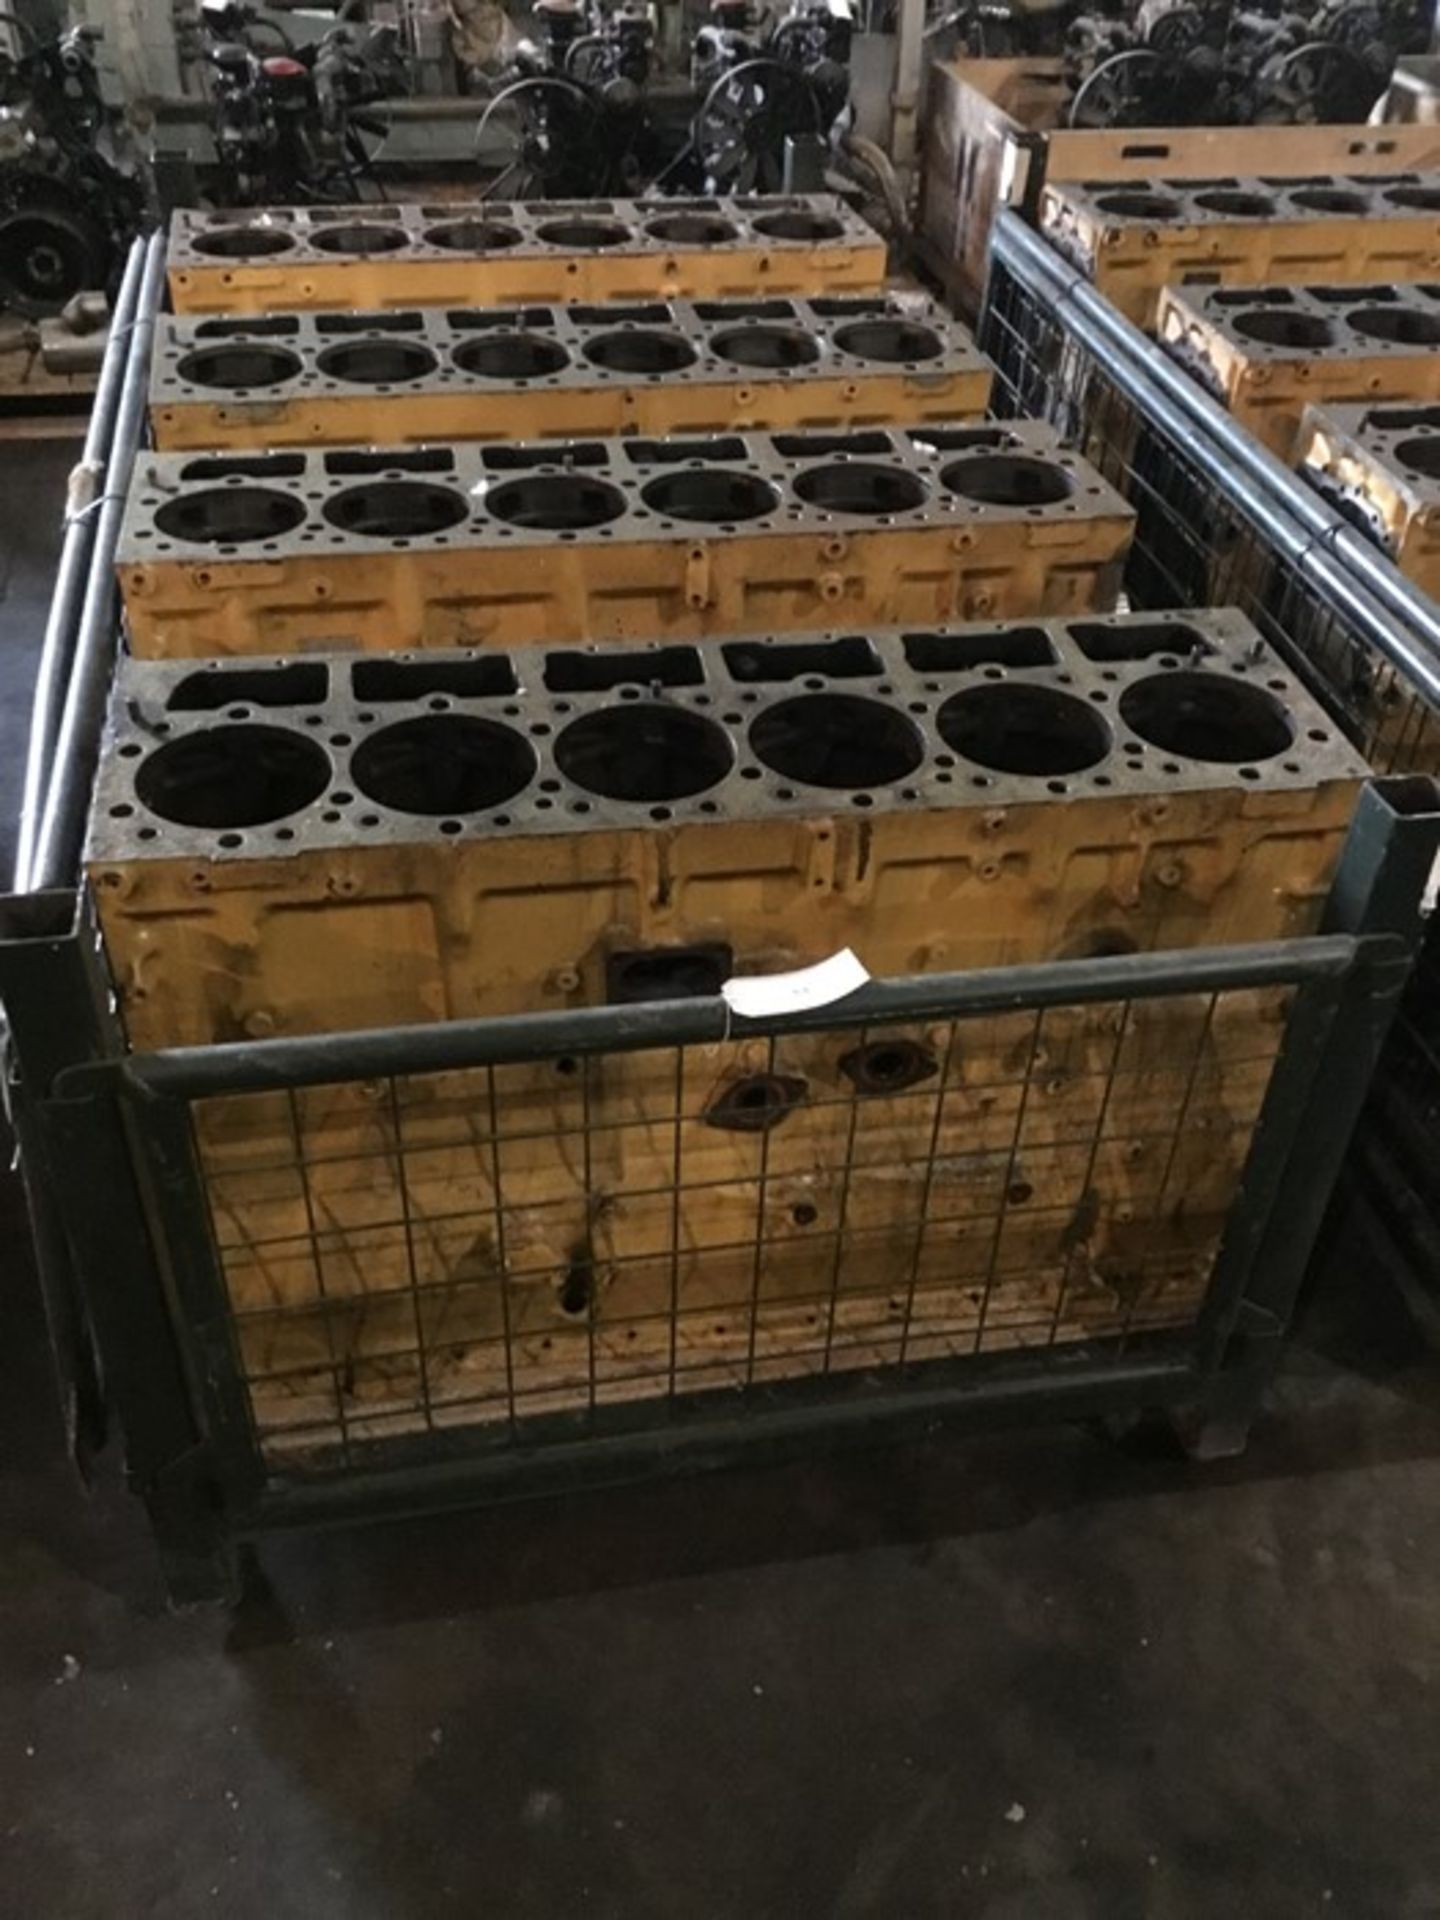 Stillage containing qty 3 Caterpillar 3406E 6cyl Bare block Serial l1DZ08615 , Serial 1DZ06186, - Image 2 of 18